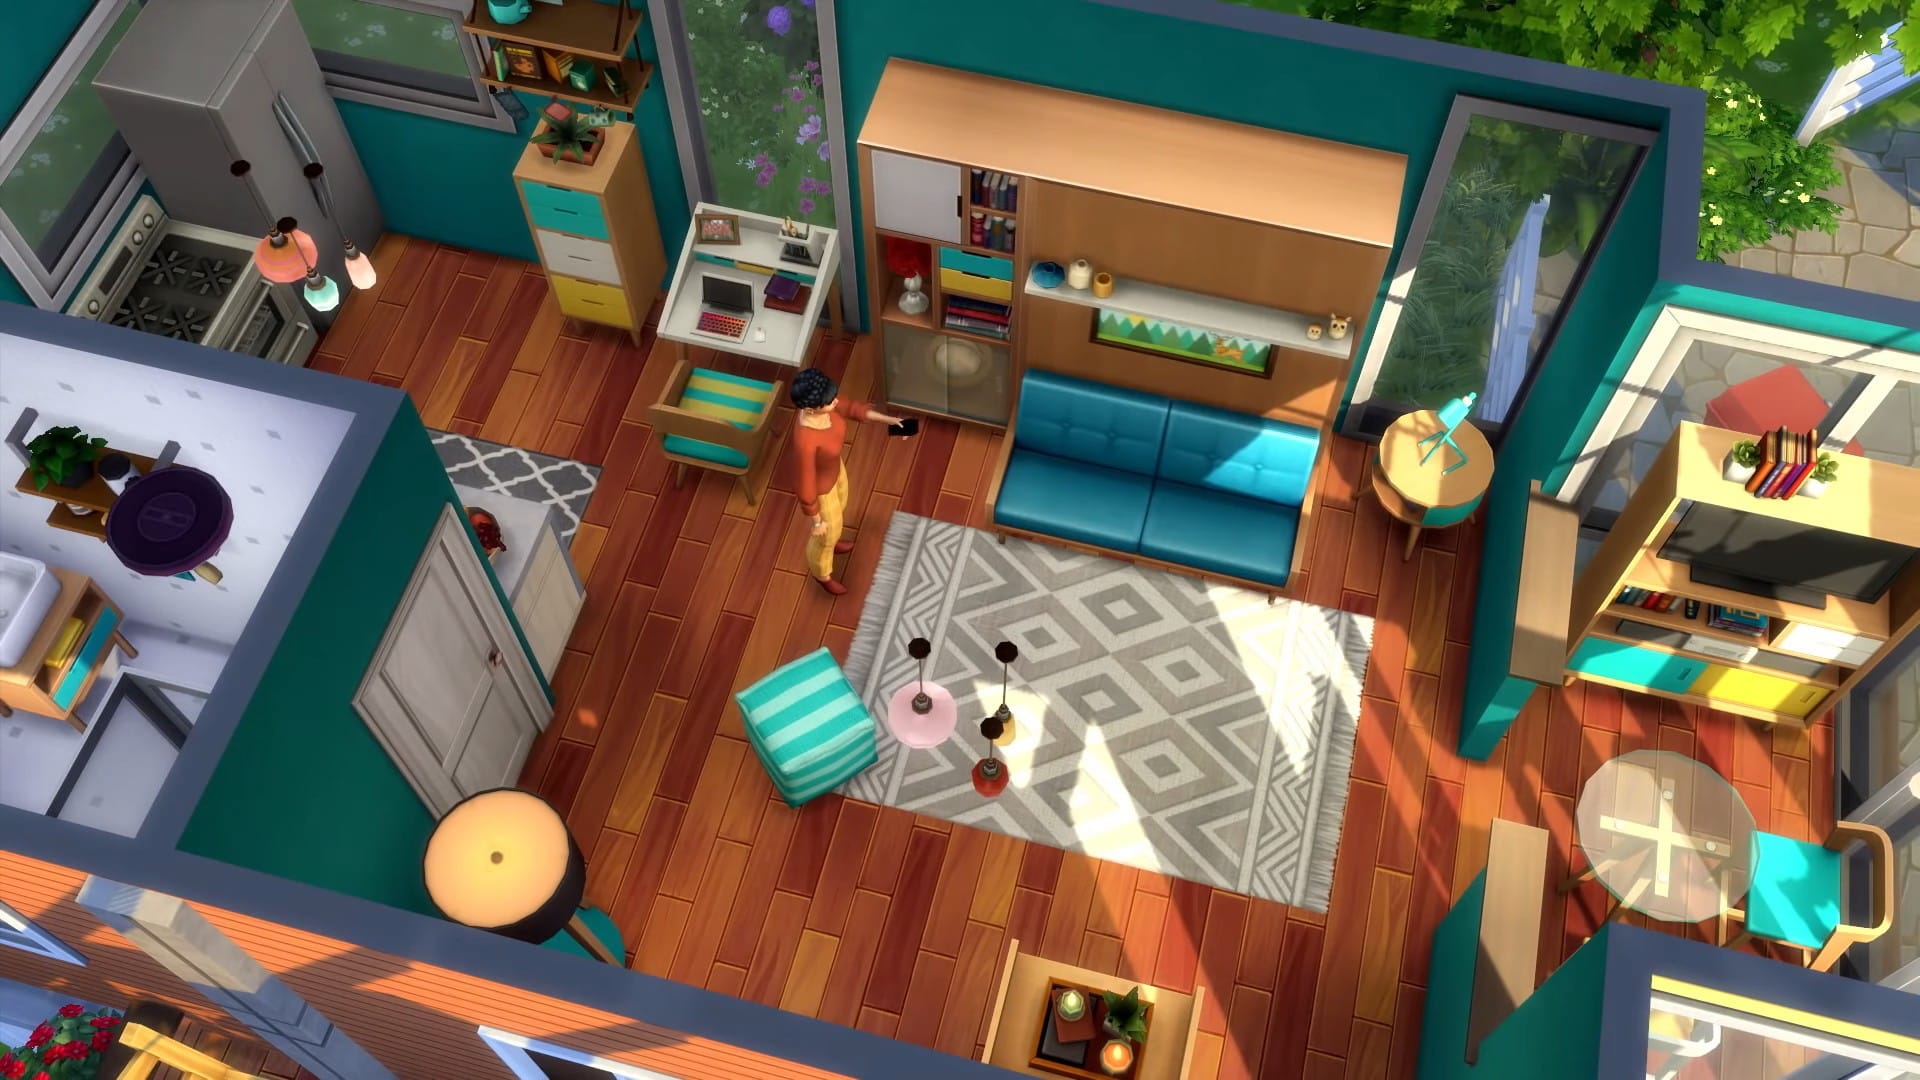 The Sims 4: Tiny Living Stuff Pack indoors